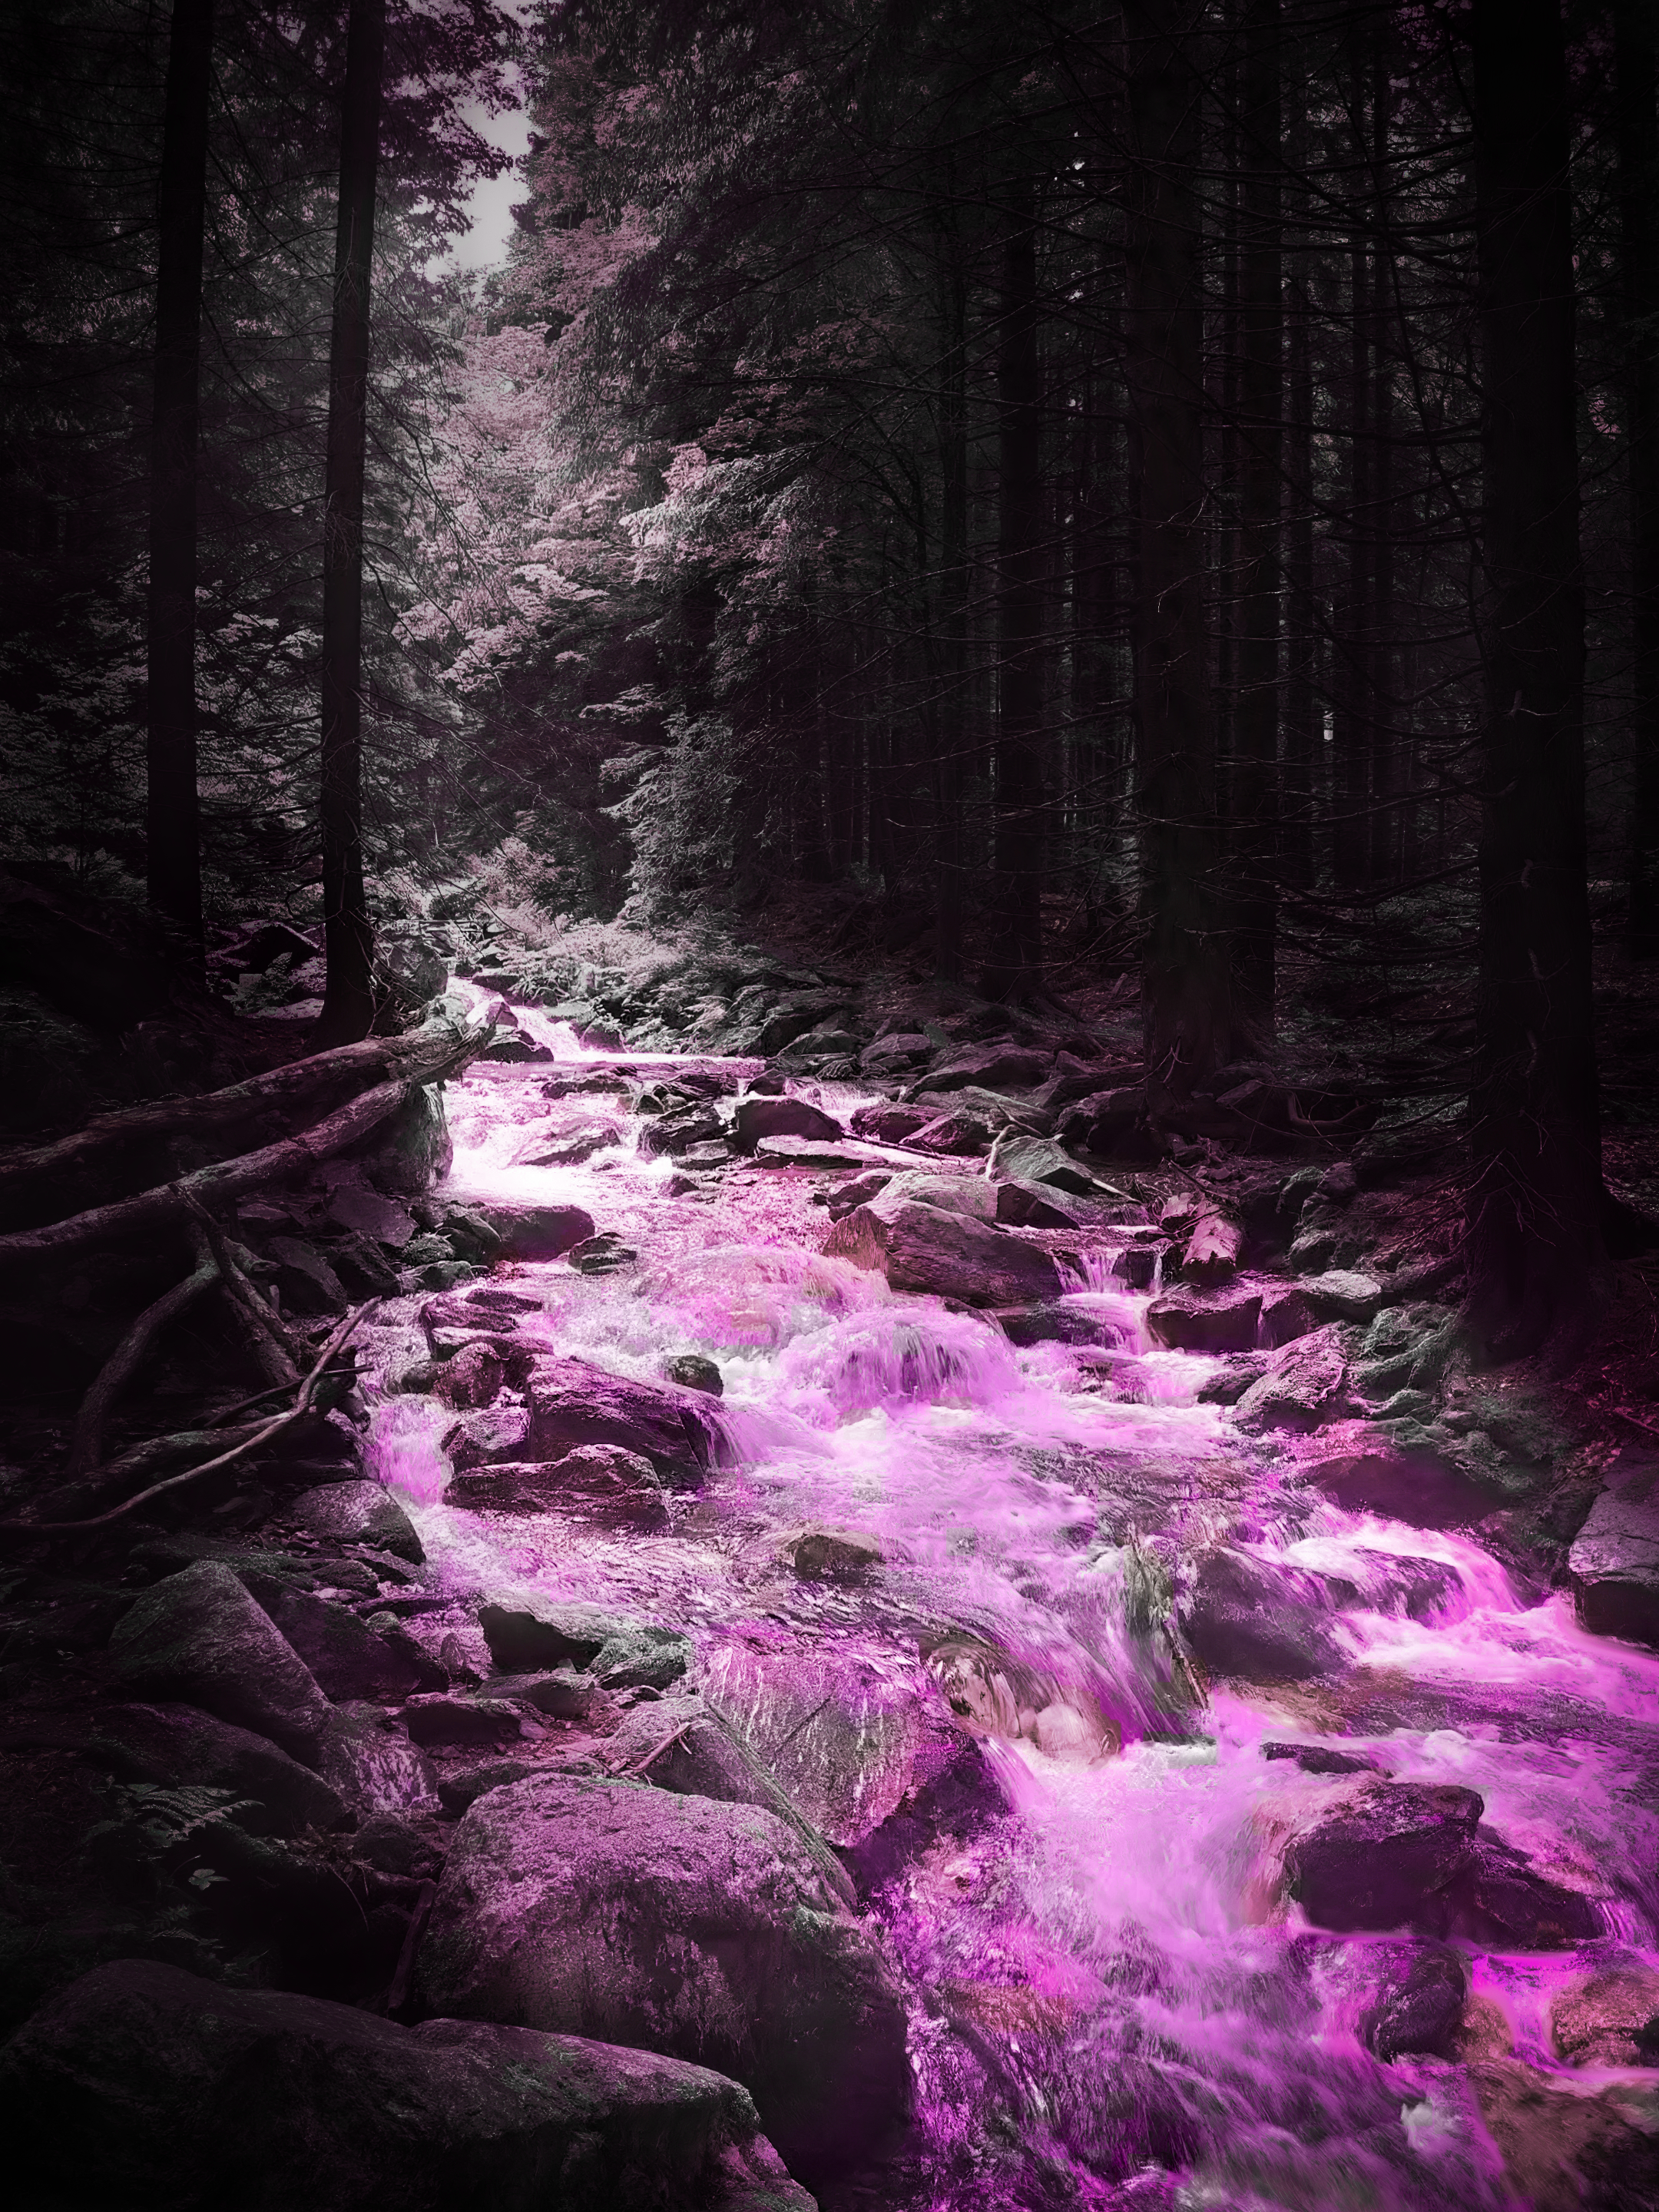 General 2160x2880 forest river water trees pink photoshopped portrait display color correction